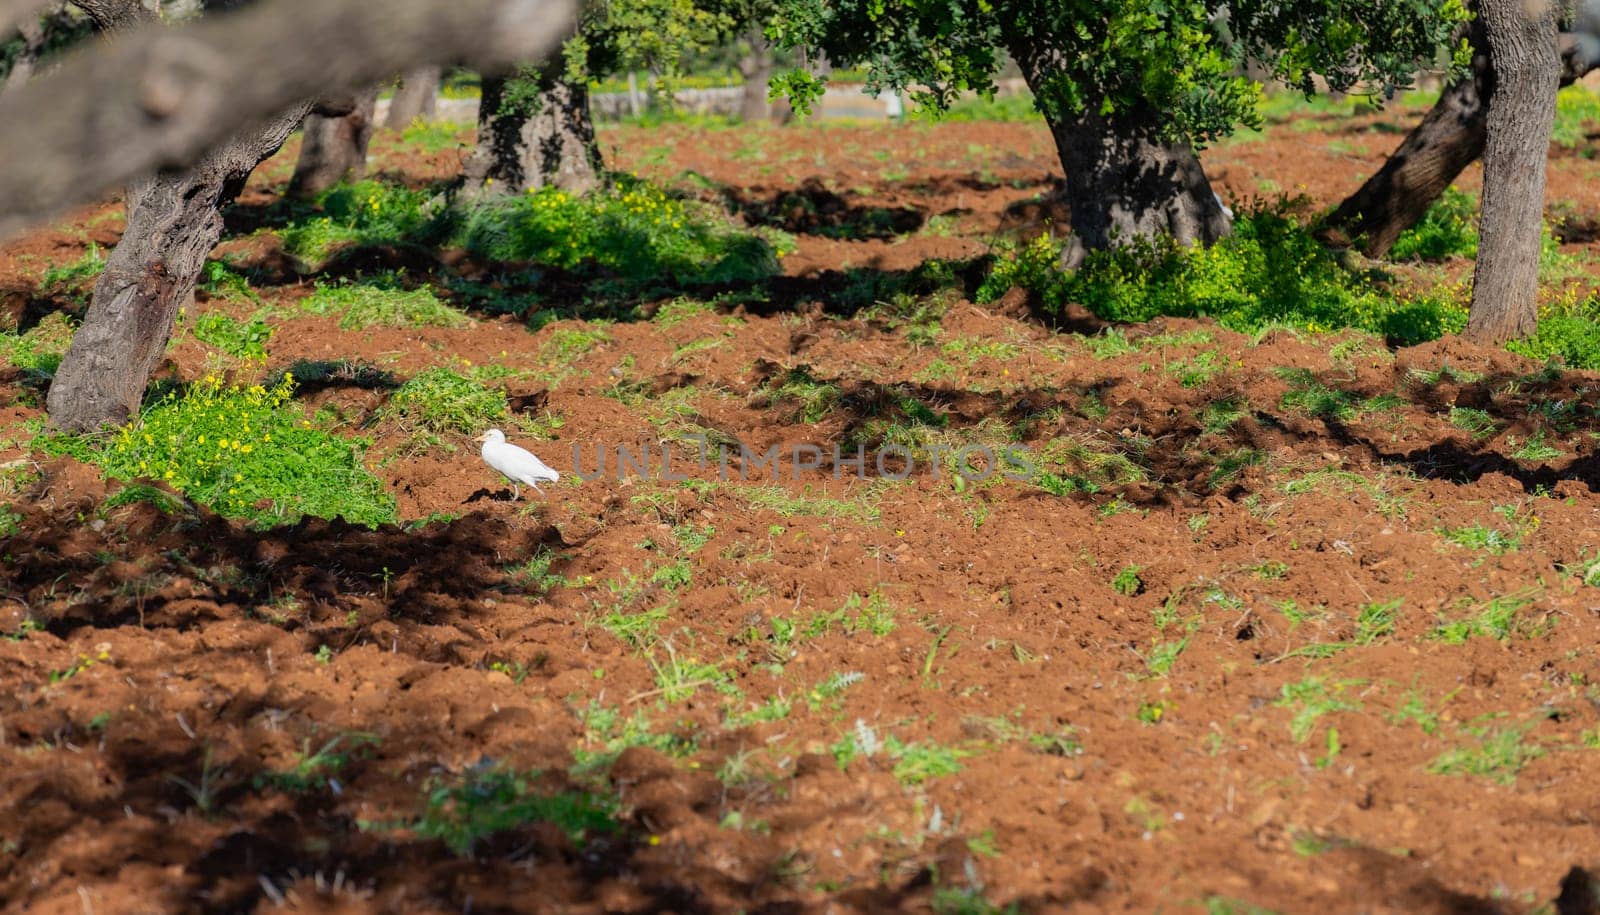 A single white bird takes a leisurely stroll across the rich, reddish soil of a vibrant orchard. The green foliage of the trees offers a sharp contrast to the tilled earth, while the bird's presence adds a touch of animate grace to the stillness of the grove